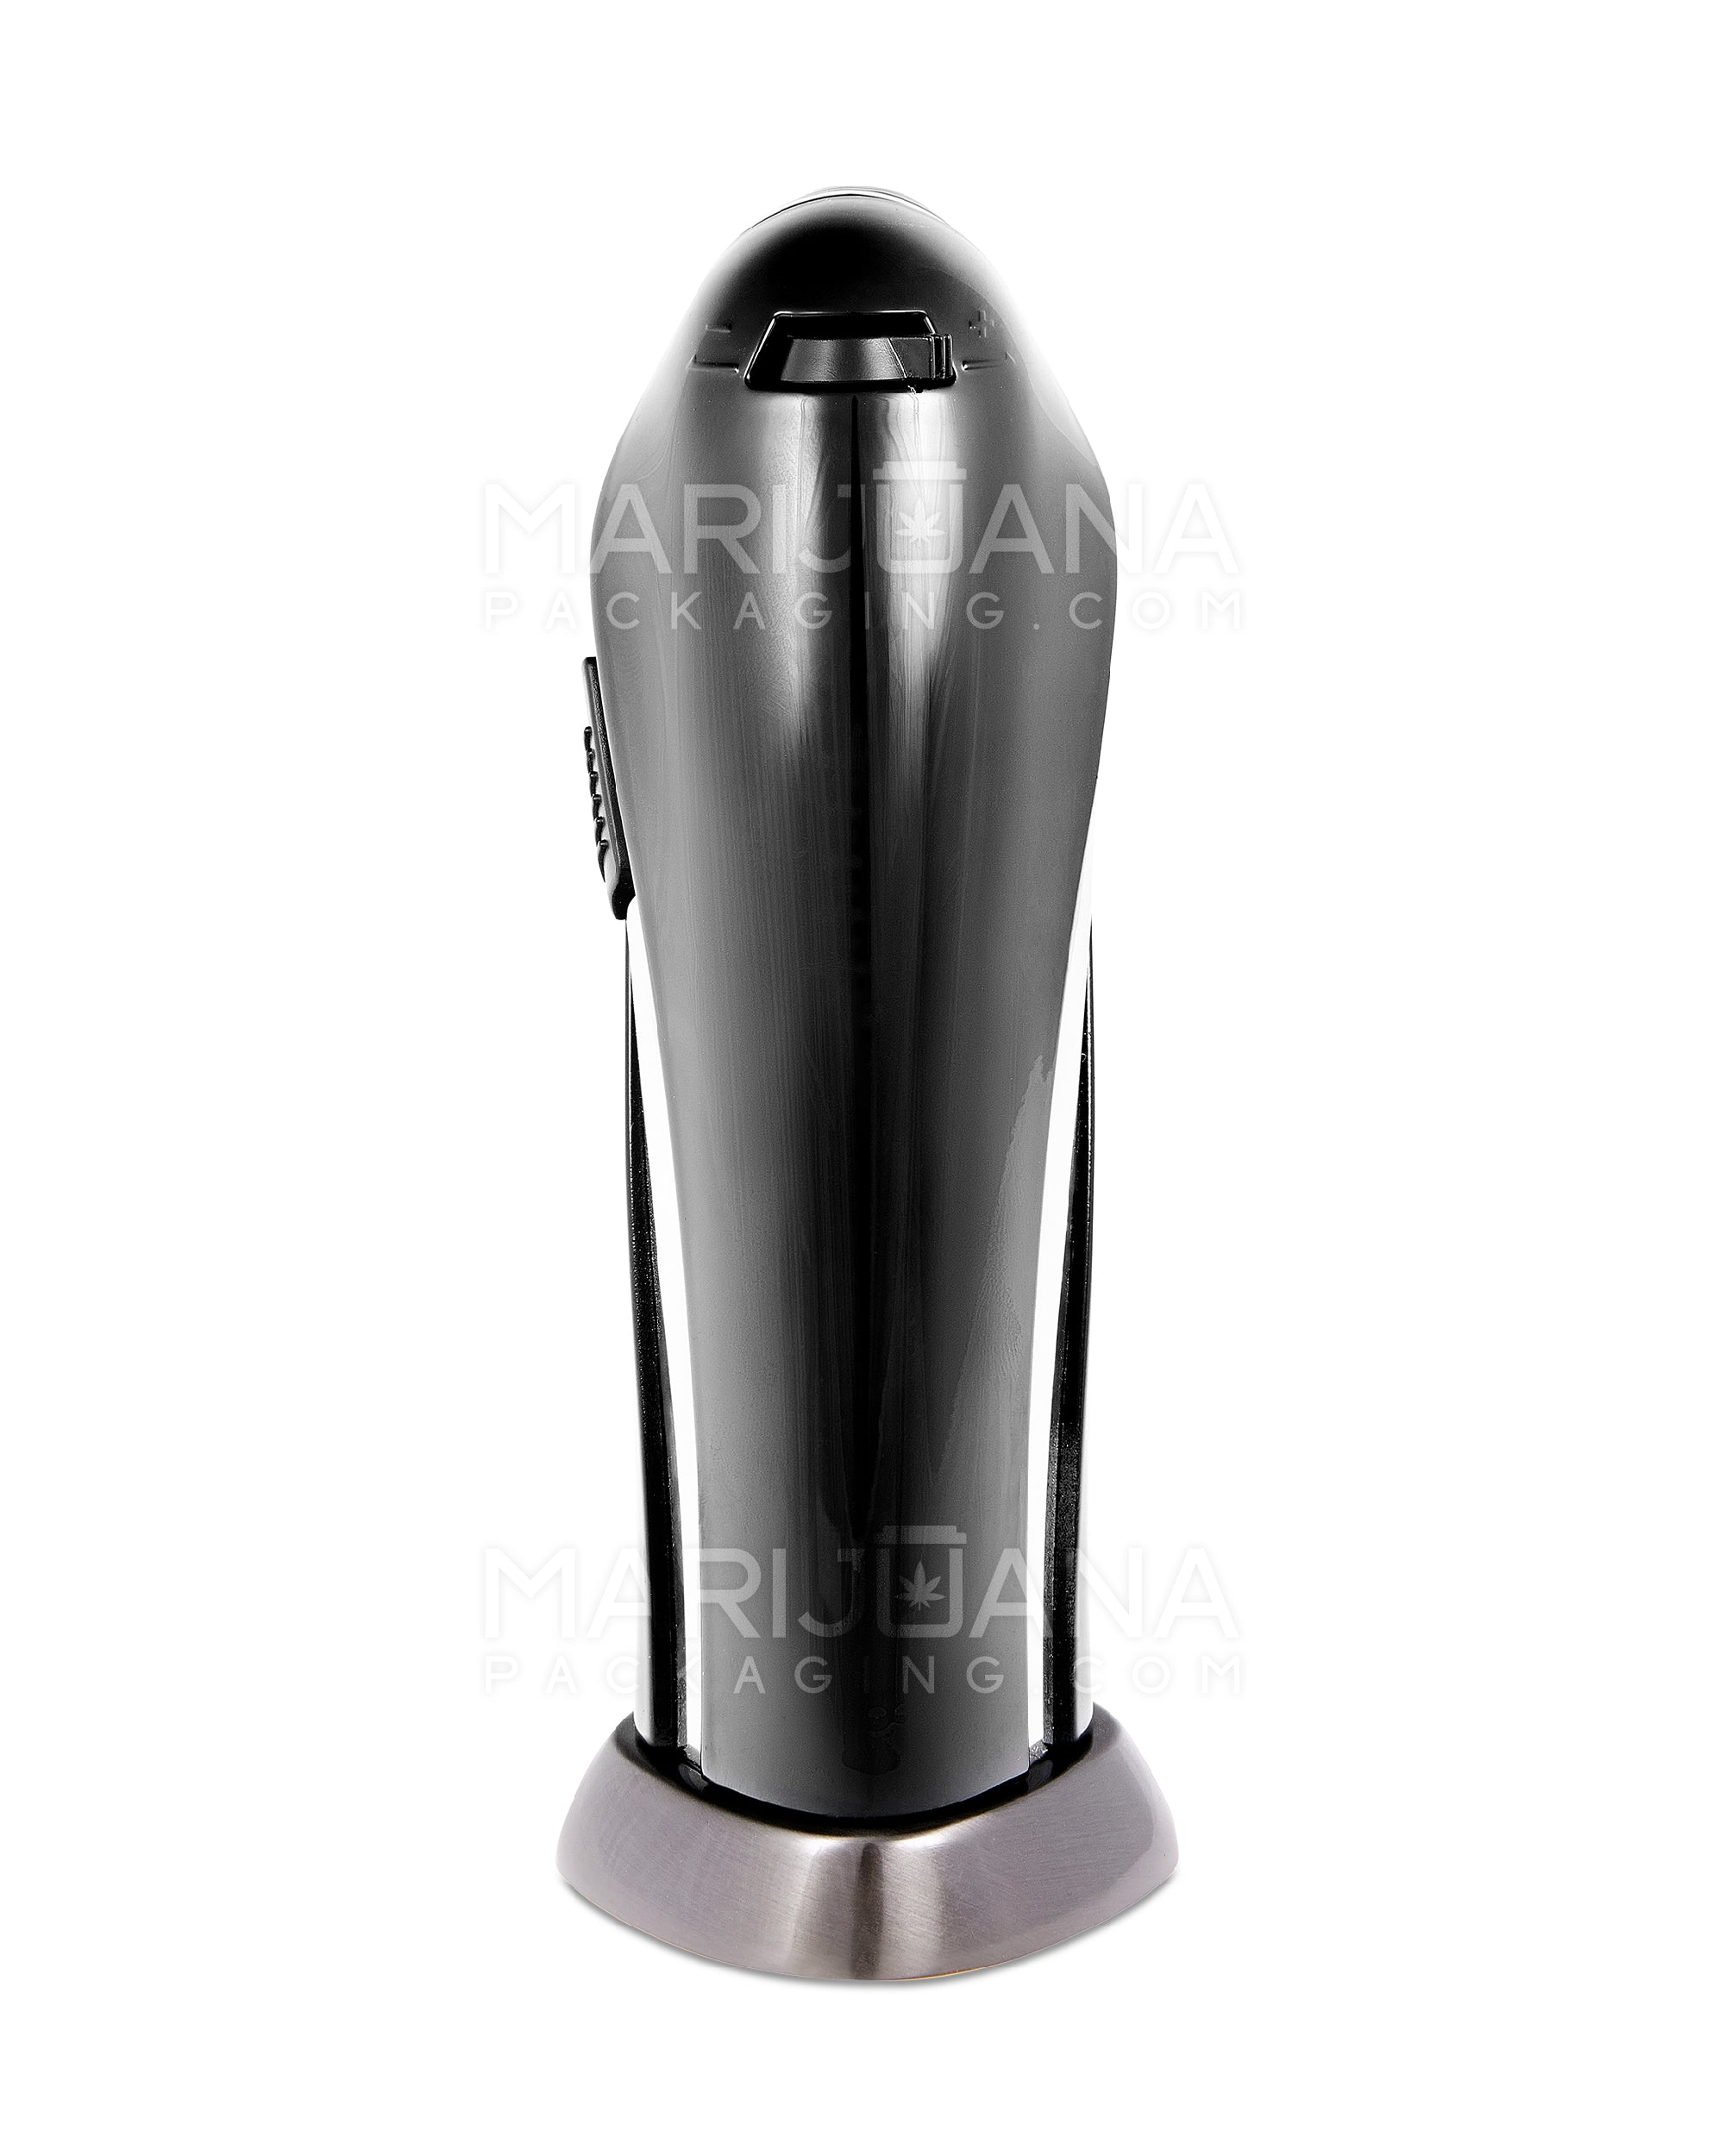 NEWPORT | Triple Flame Torch w/ Adjustable Flame | 6in Tall - No Butane - Black & Silver